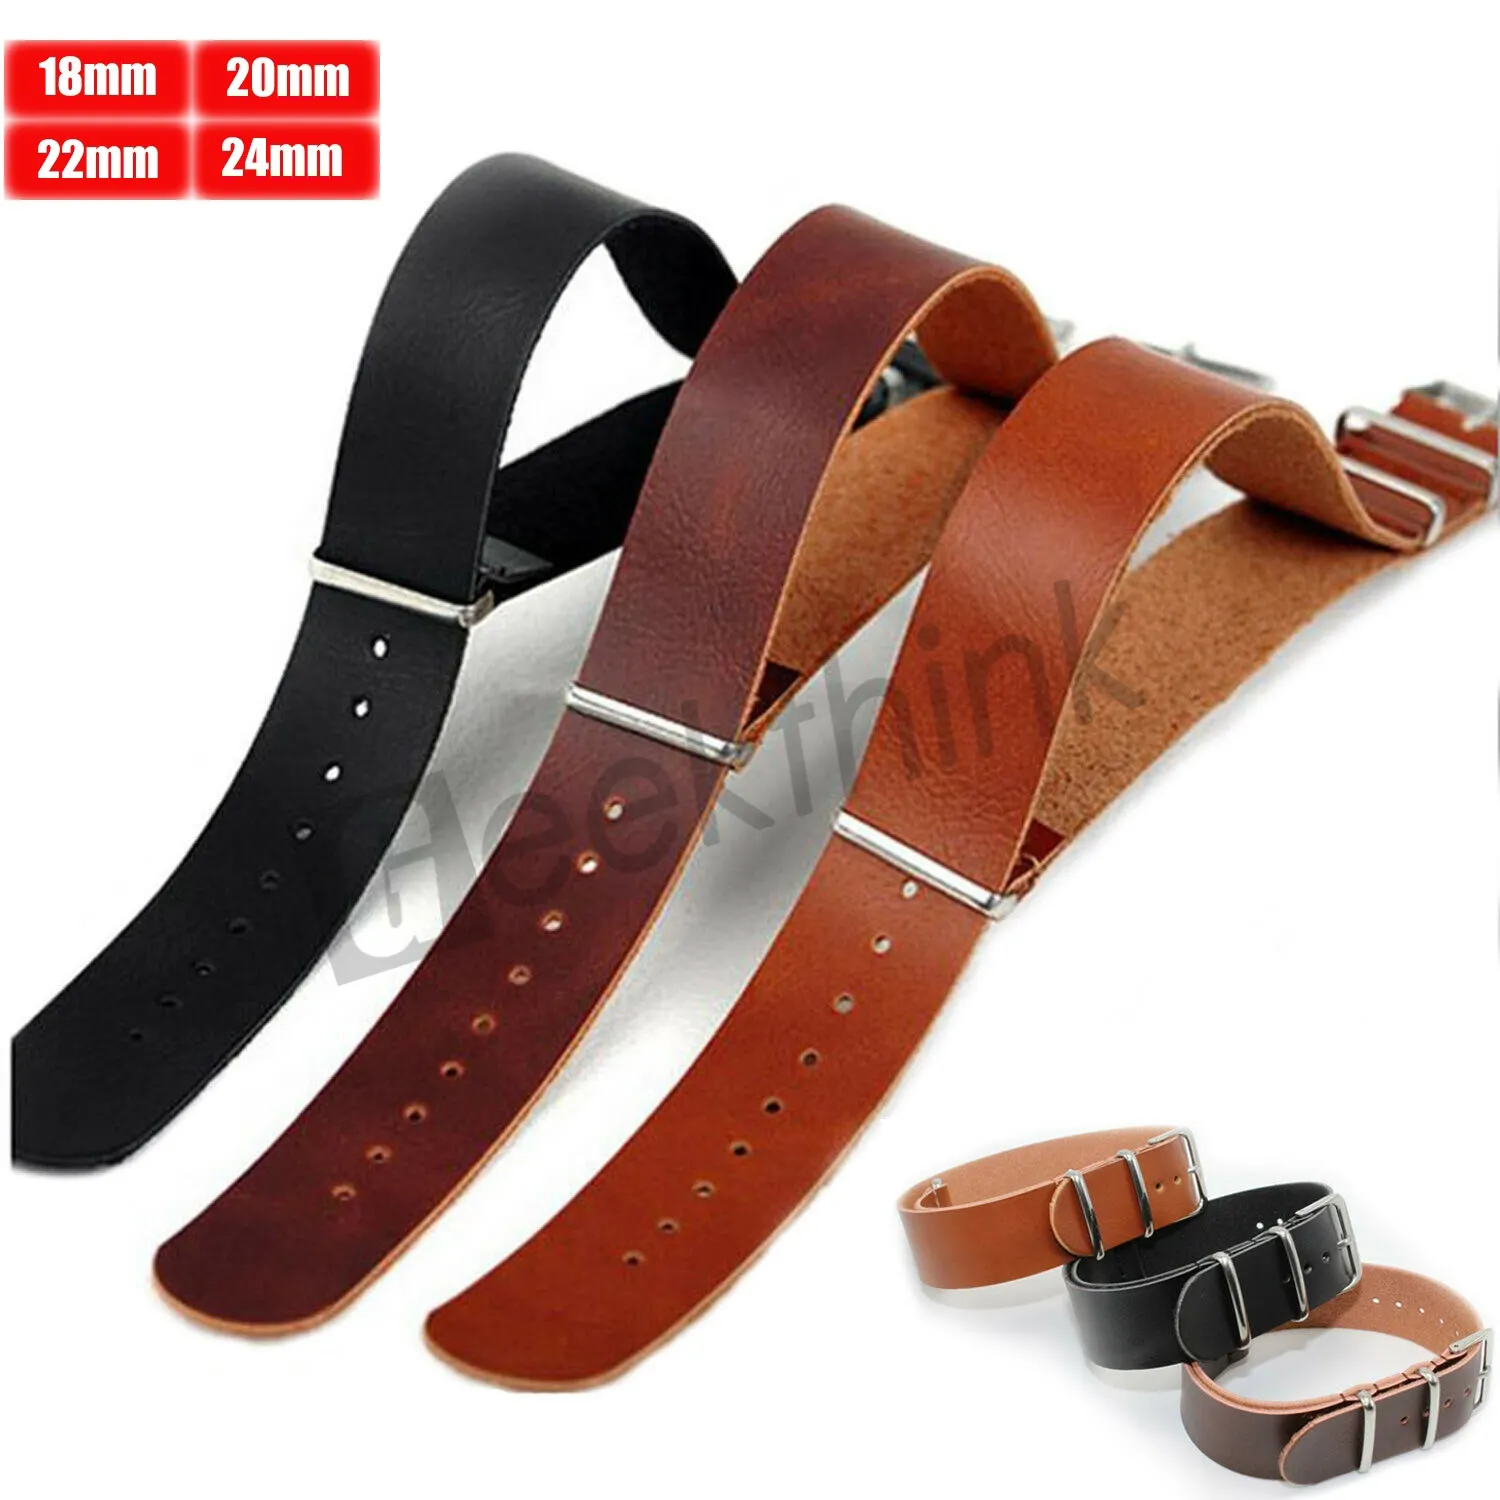 18mm 20mm 22mm 24mm Genuine Leather Watch Band Retro Leather Watch Strap Bracelet for Man Women Wristband